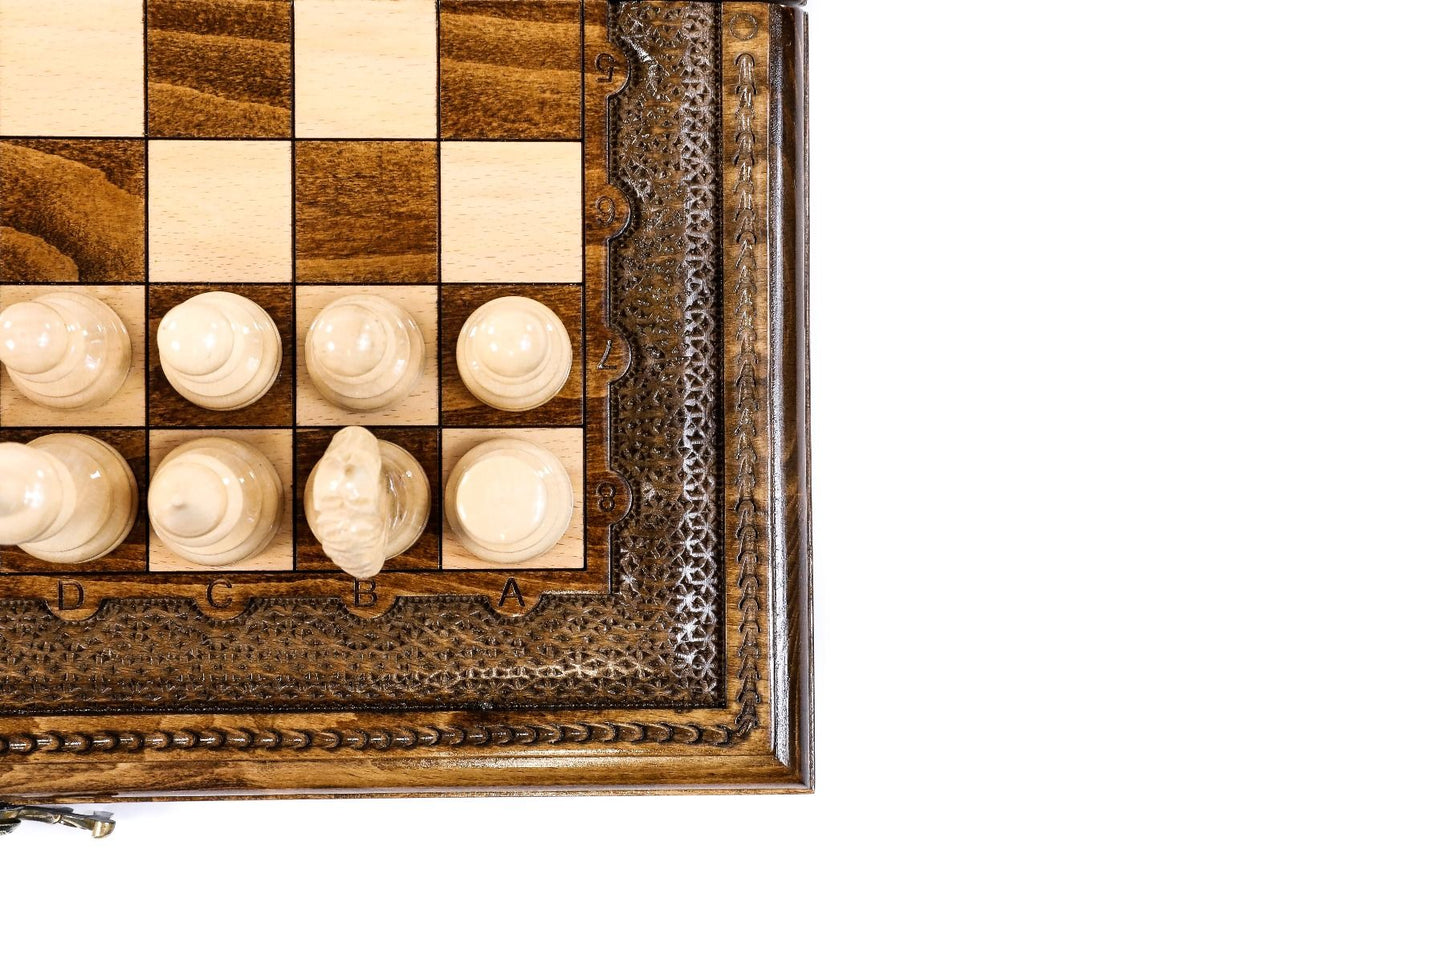 A testament to skilled craftsmanship, this unique set invites players to explore chess and backgammon within a framework of unparalleled beauty.